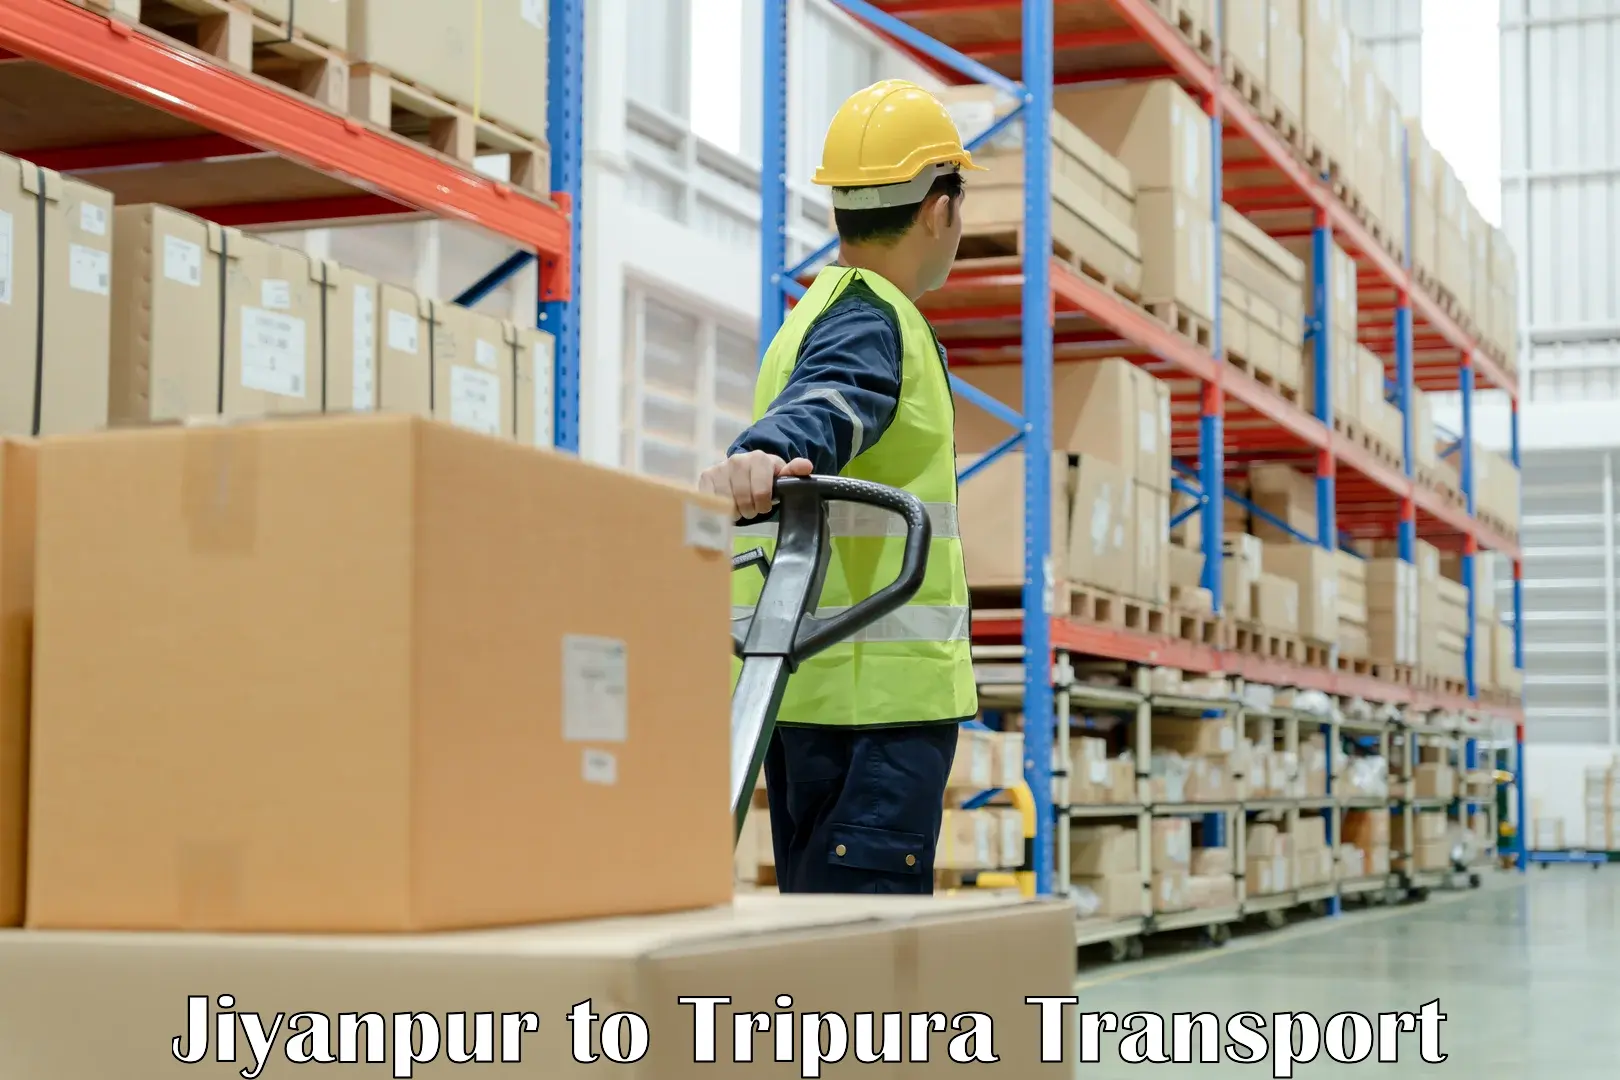 Transportation solution services Jiyanpur to Udaipur Tripura